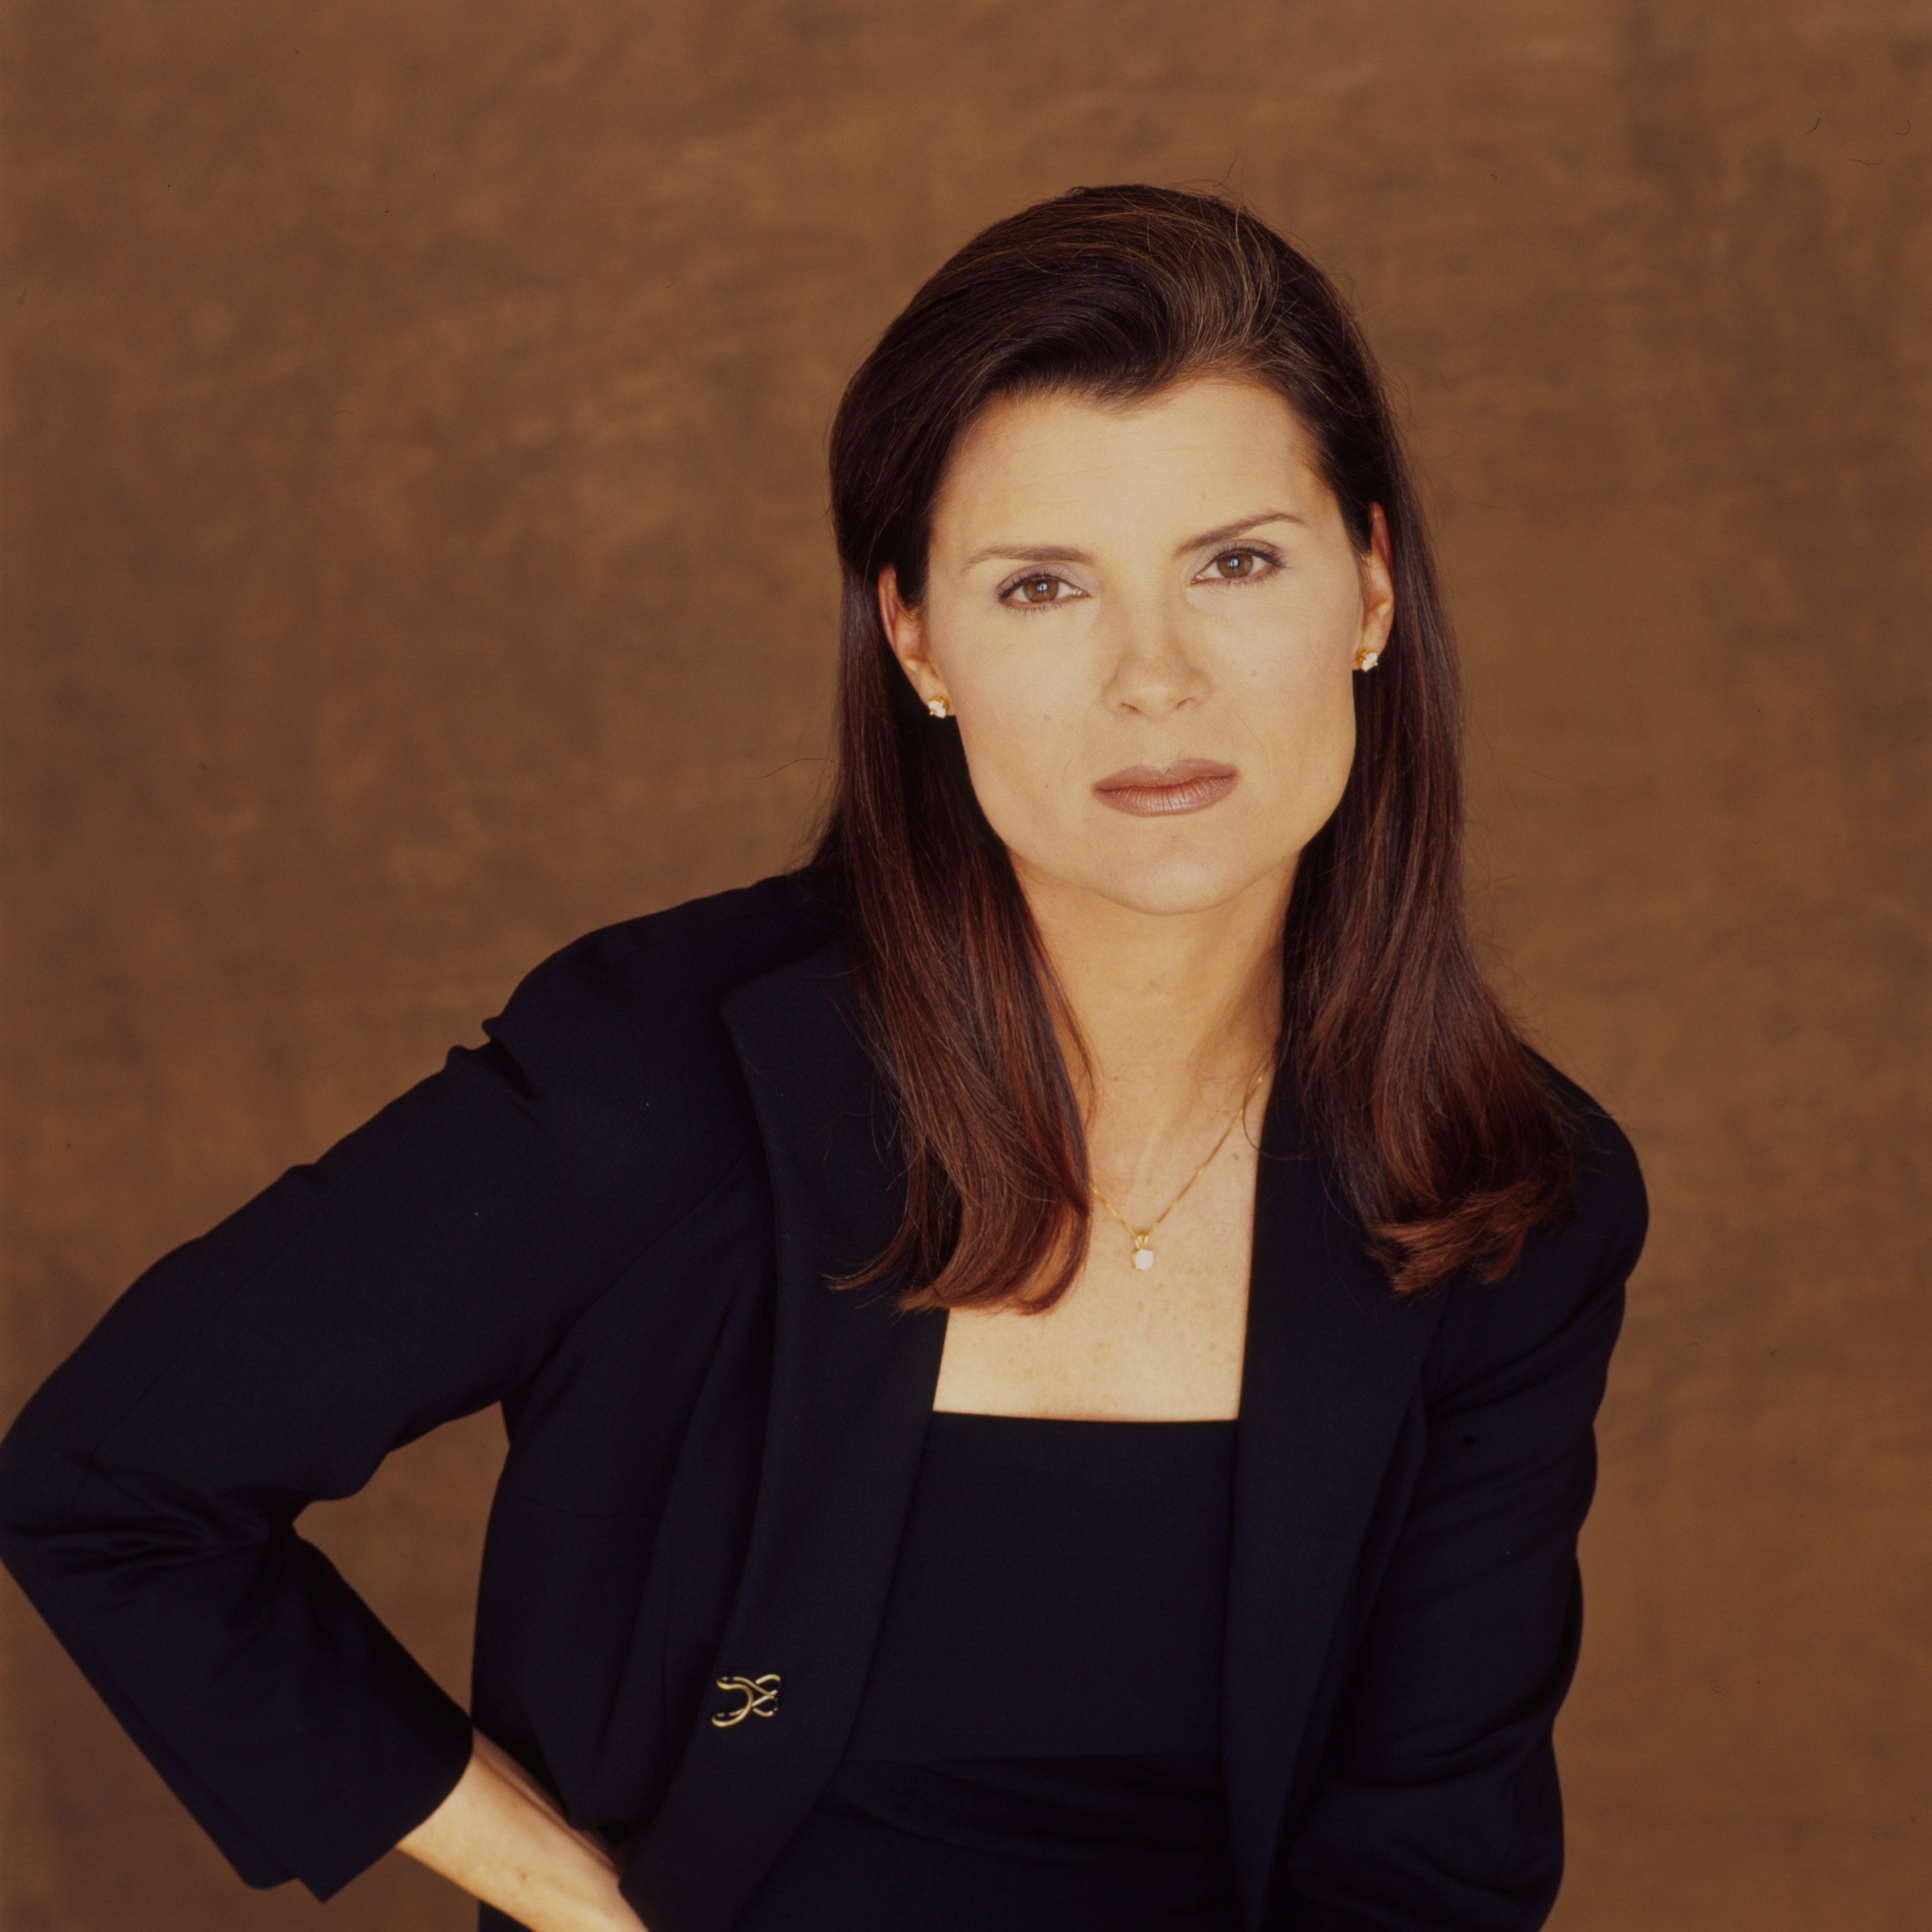 'The Bold and the Beautiful' actor Kimberlin Brown wearing a navy blue suit and standing in front of a brown backdrop.